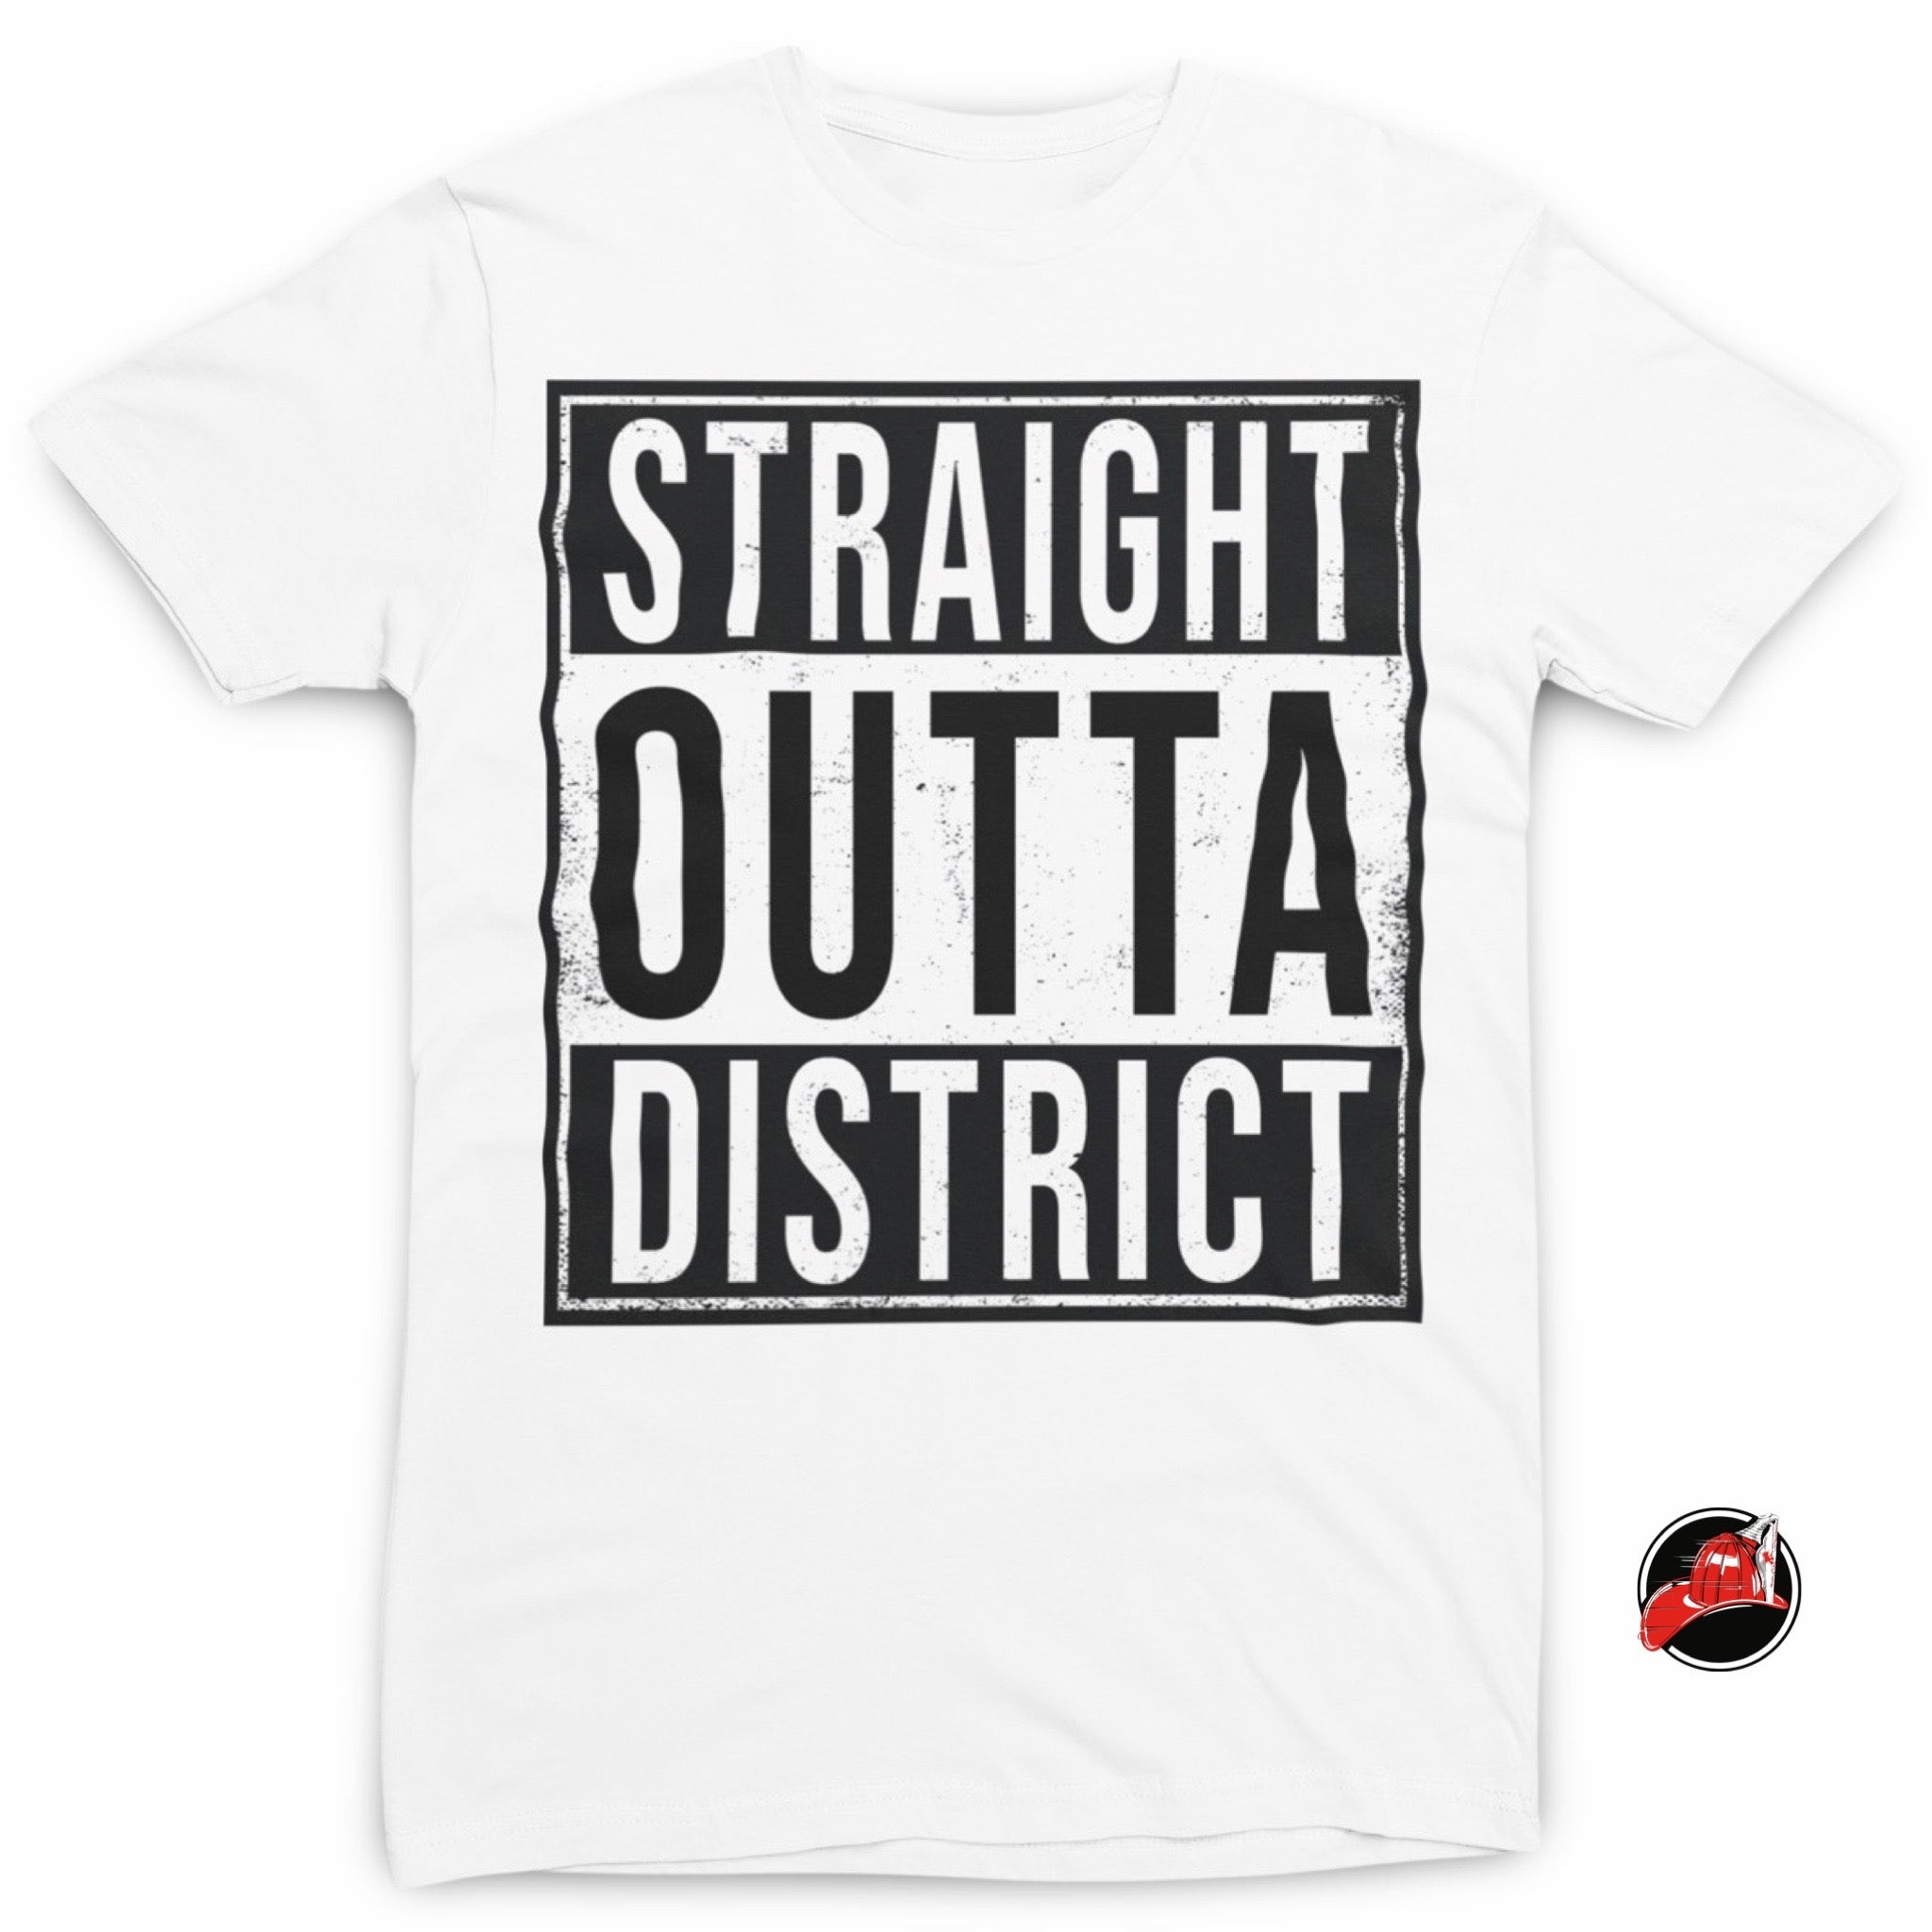 Outta District Tee